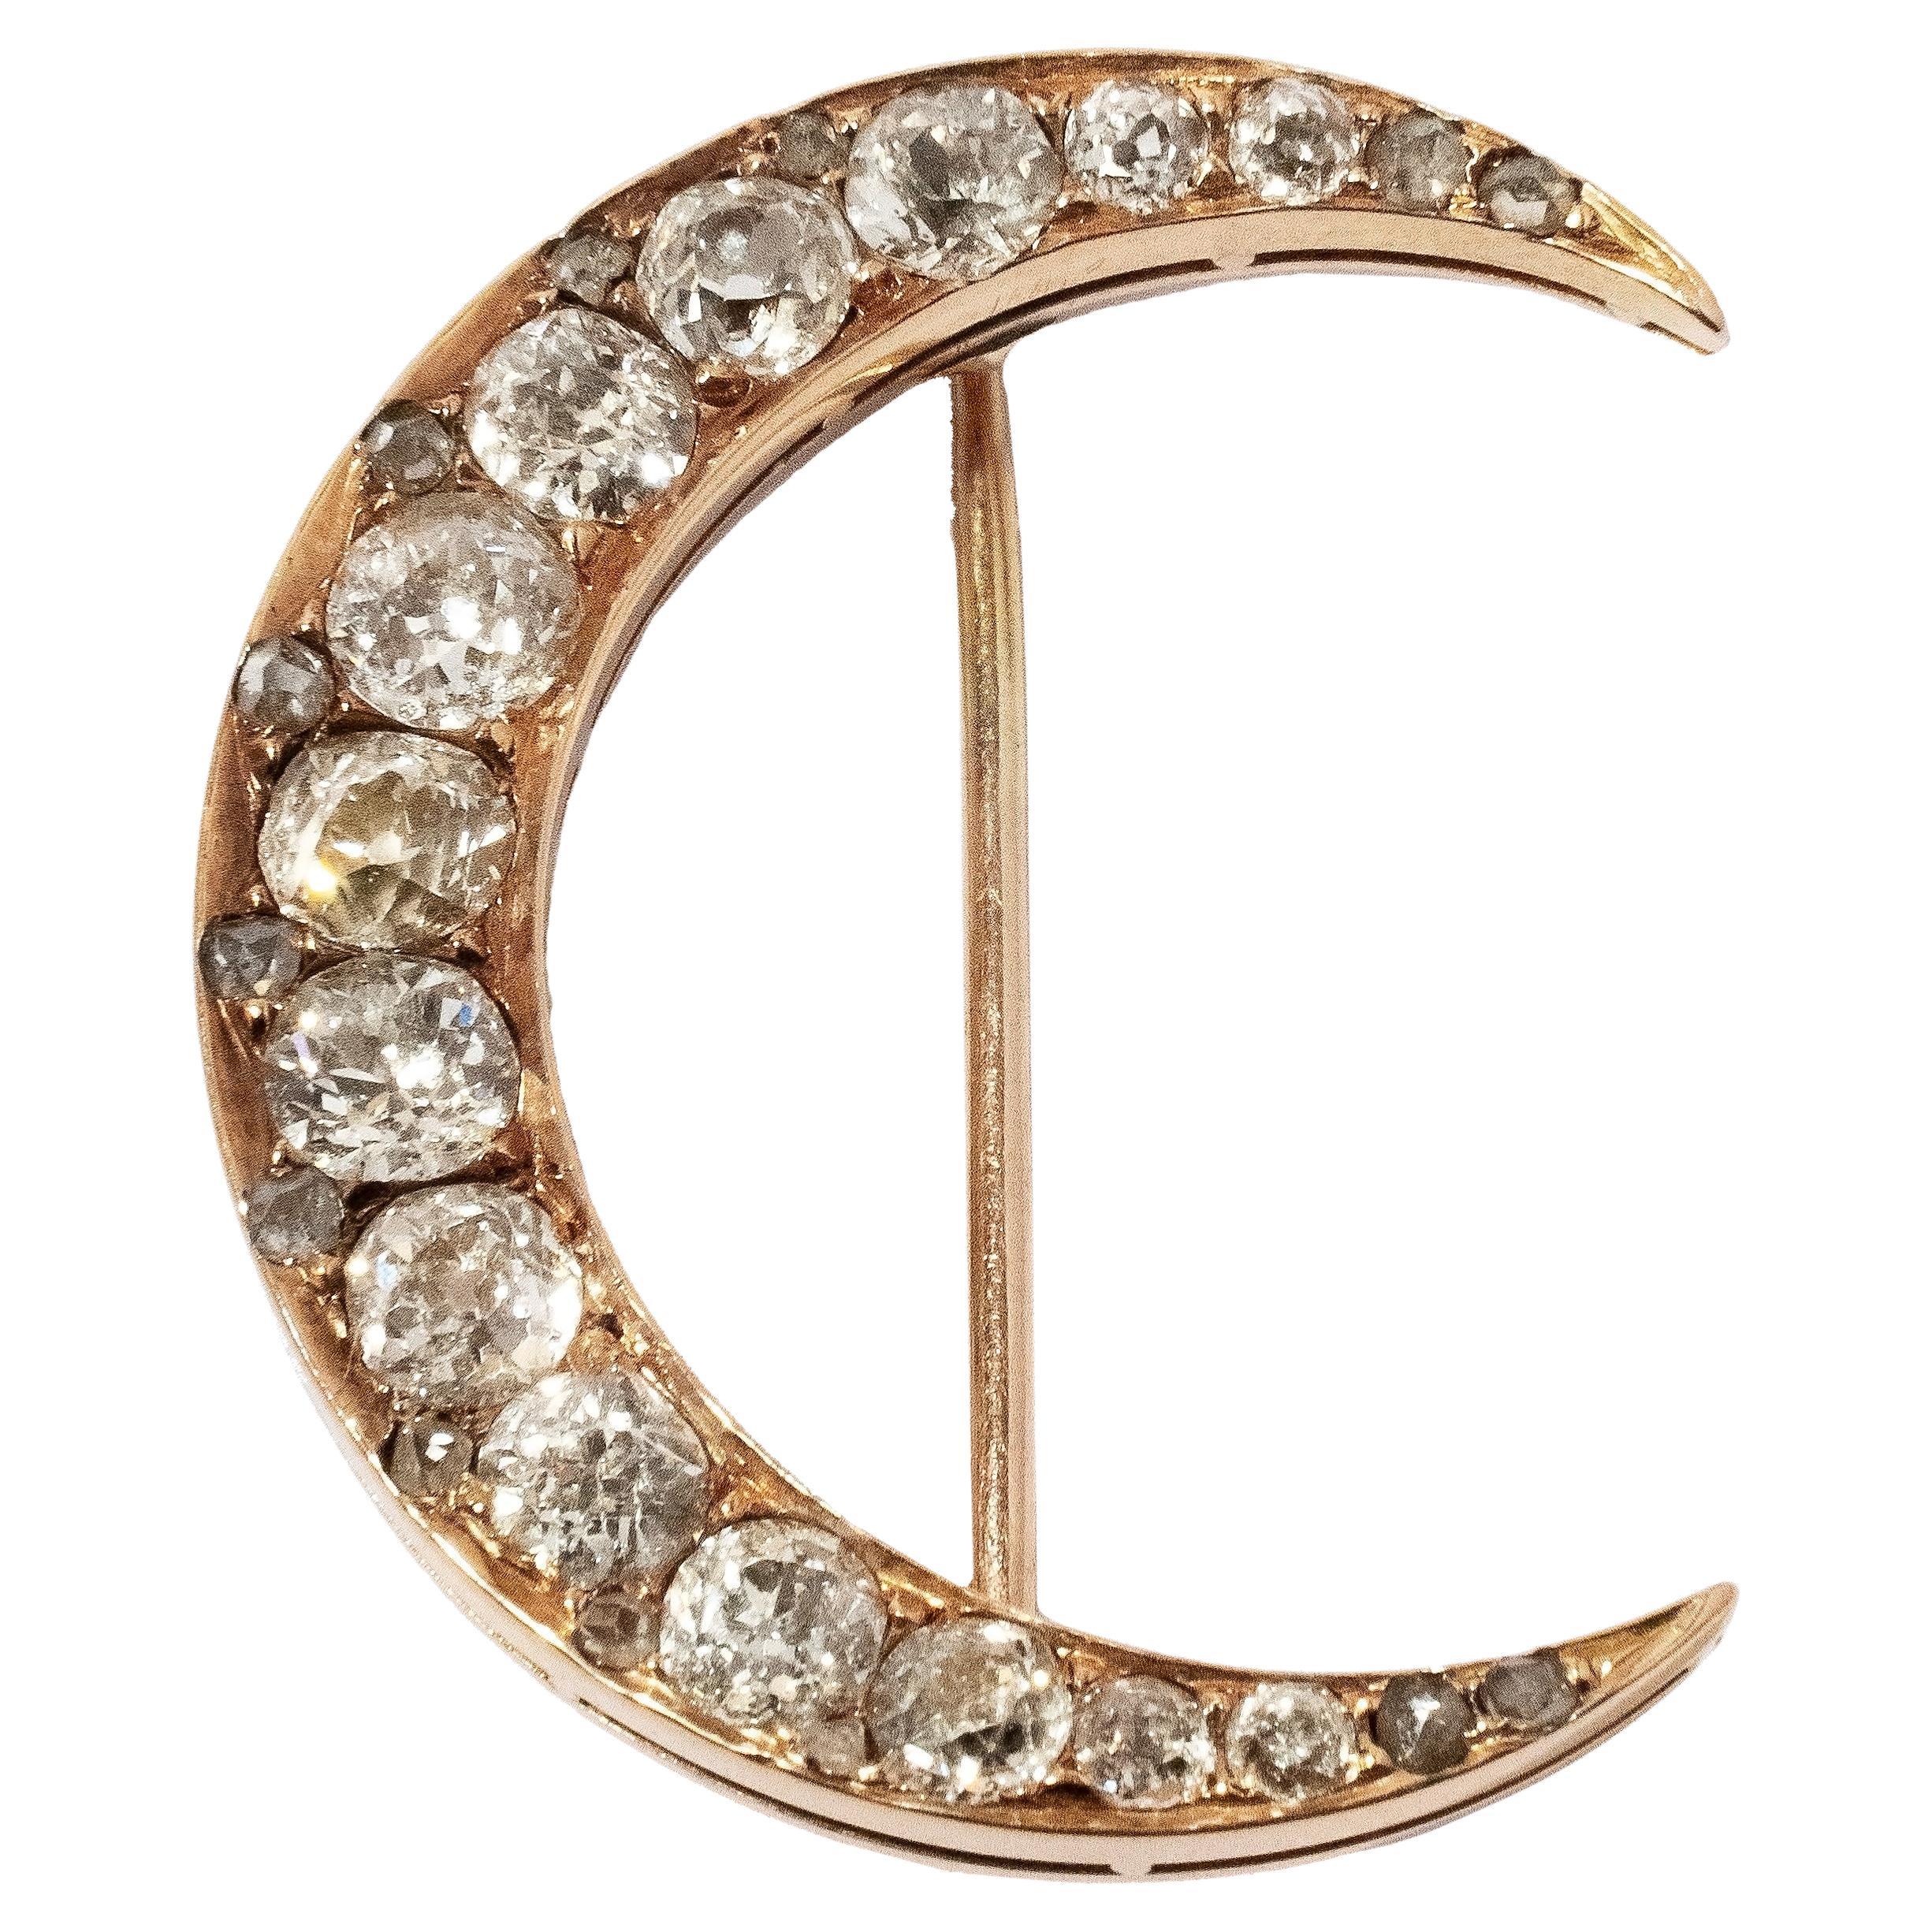  19th Century Antique Diamond encrusted Crescent Moon Brooch For Sale